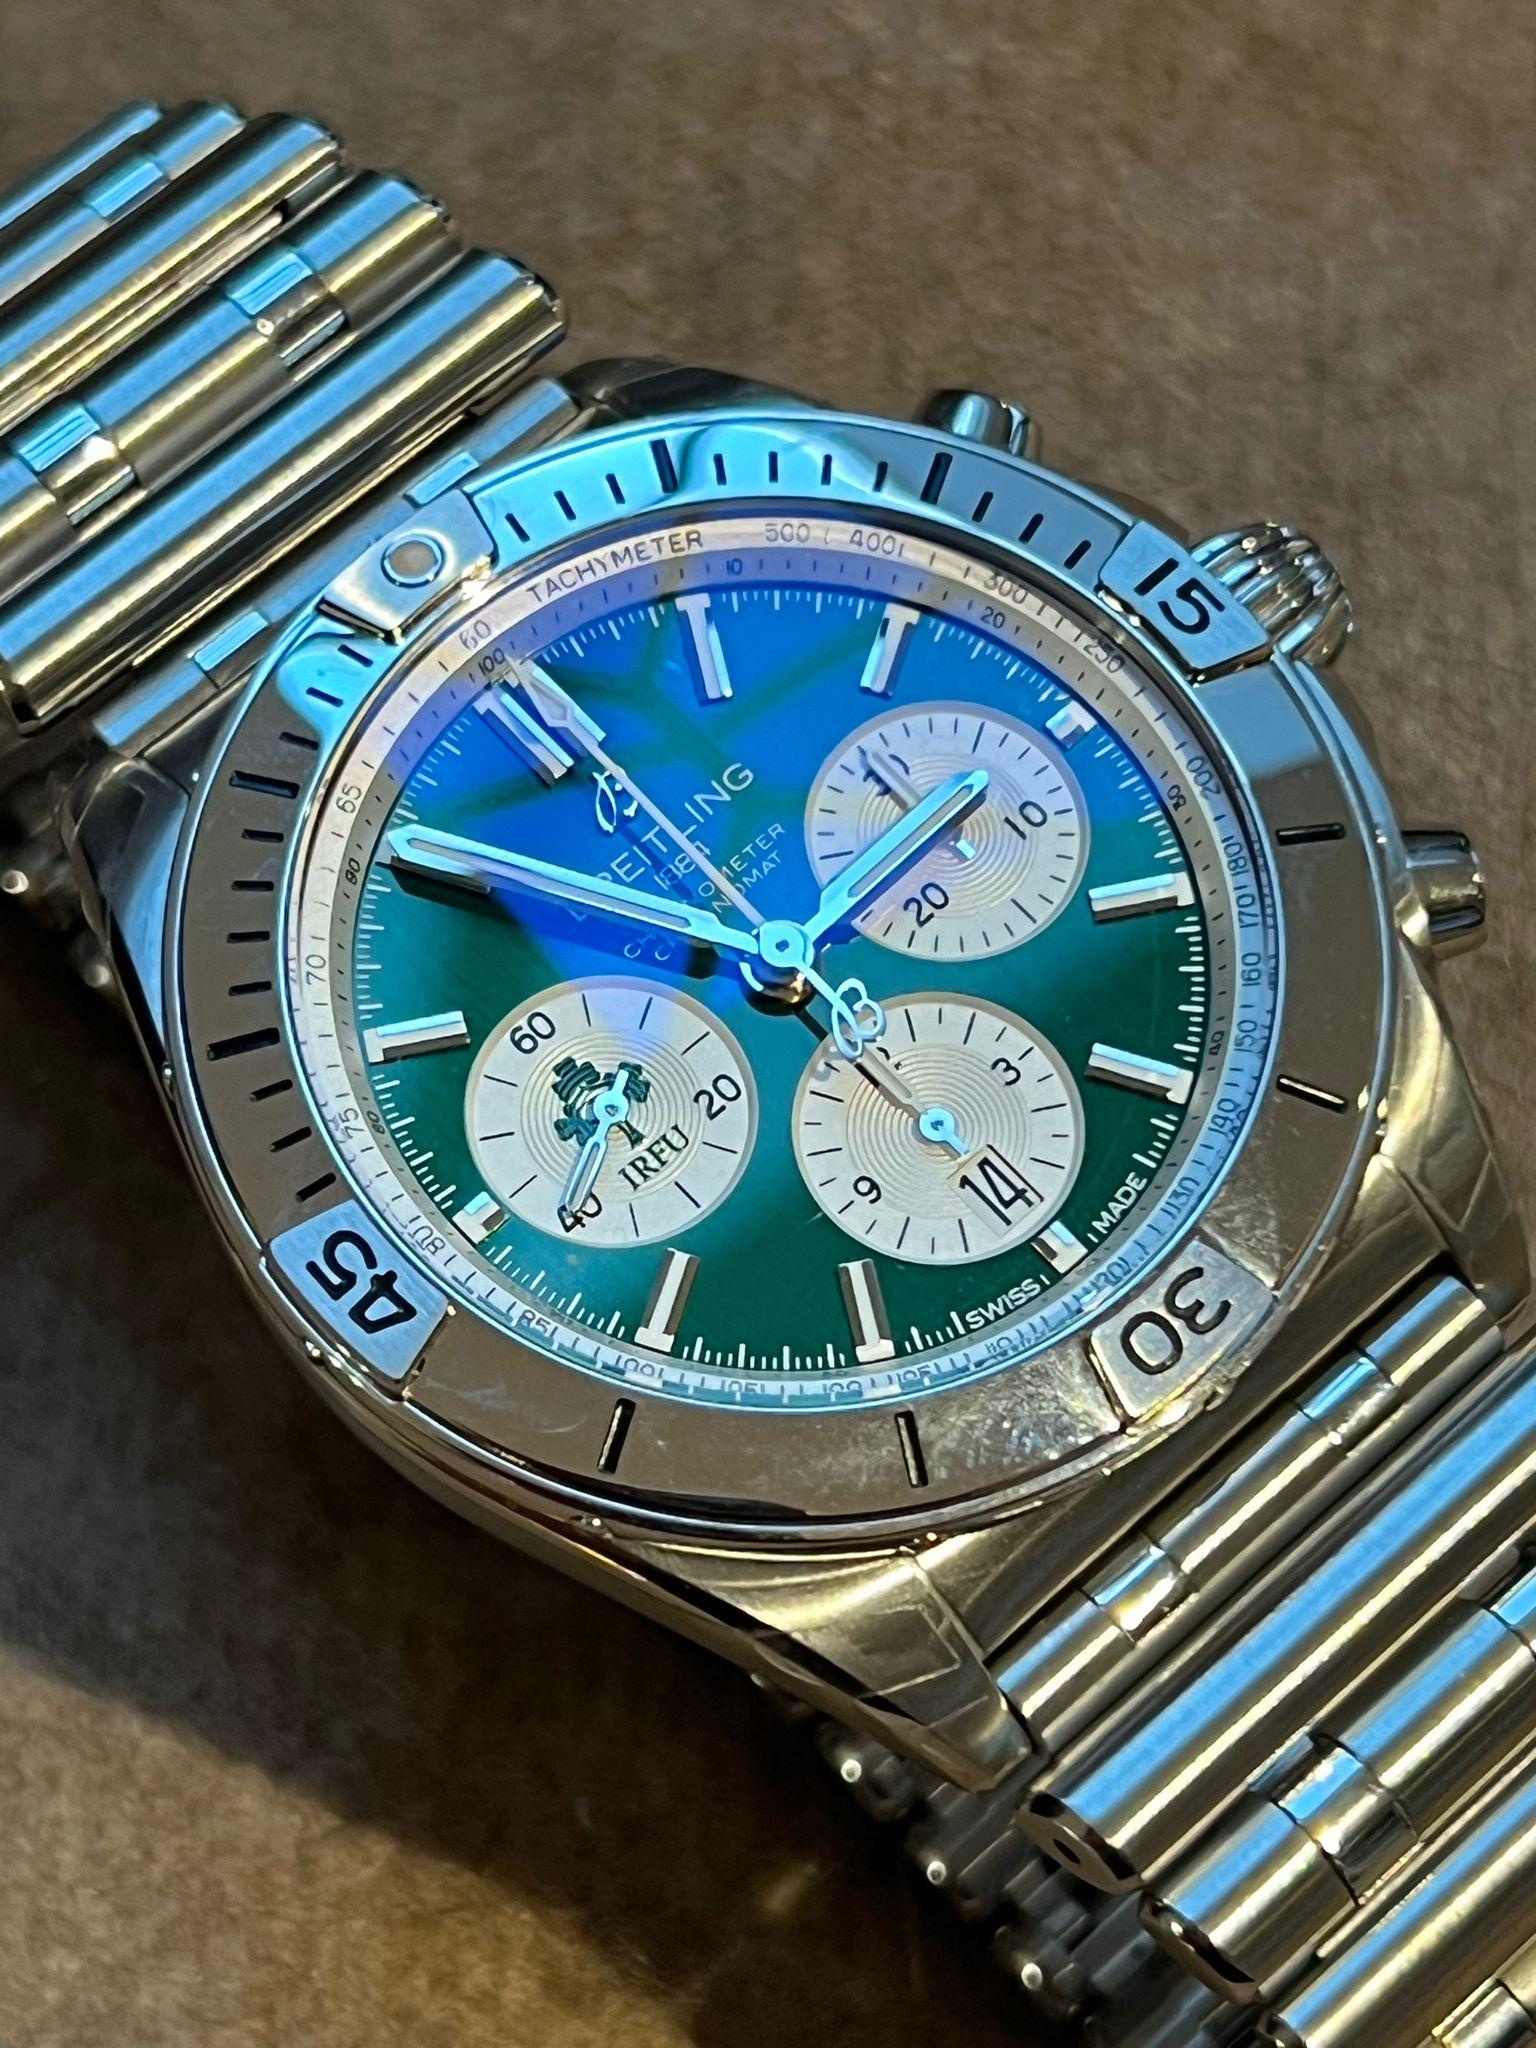 ChRONOMAT B01 NOUVEAU BRAND ÉDITION EARLY EDiTION NEW BREITLING, 42 SIX NATIONS IRELAND WATCH 13